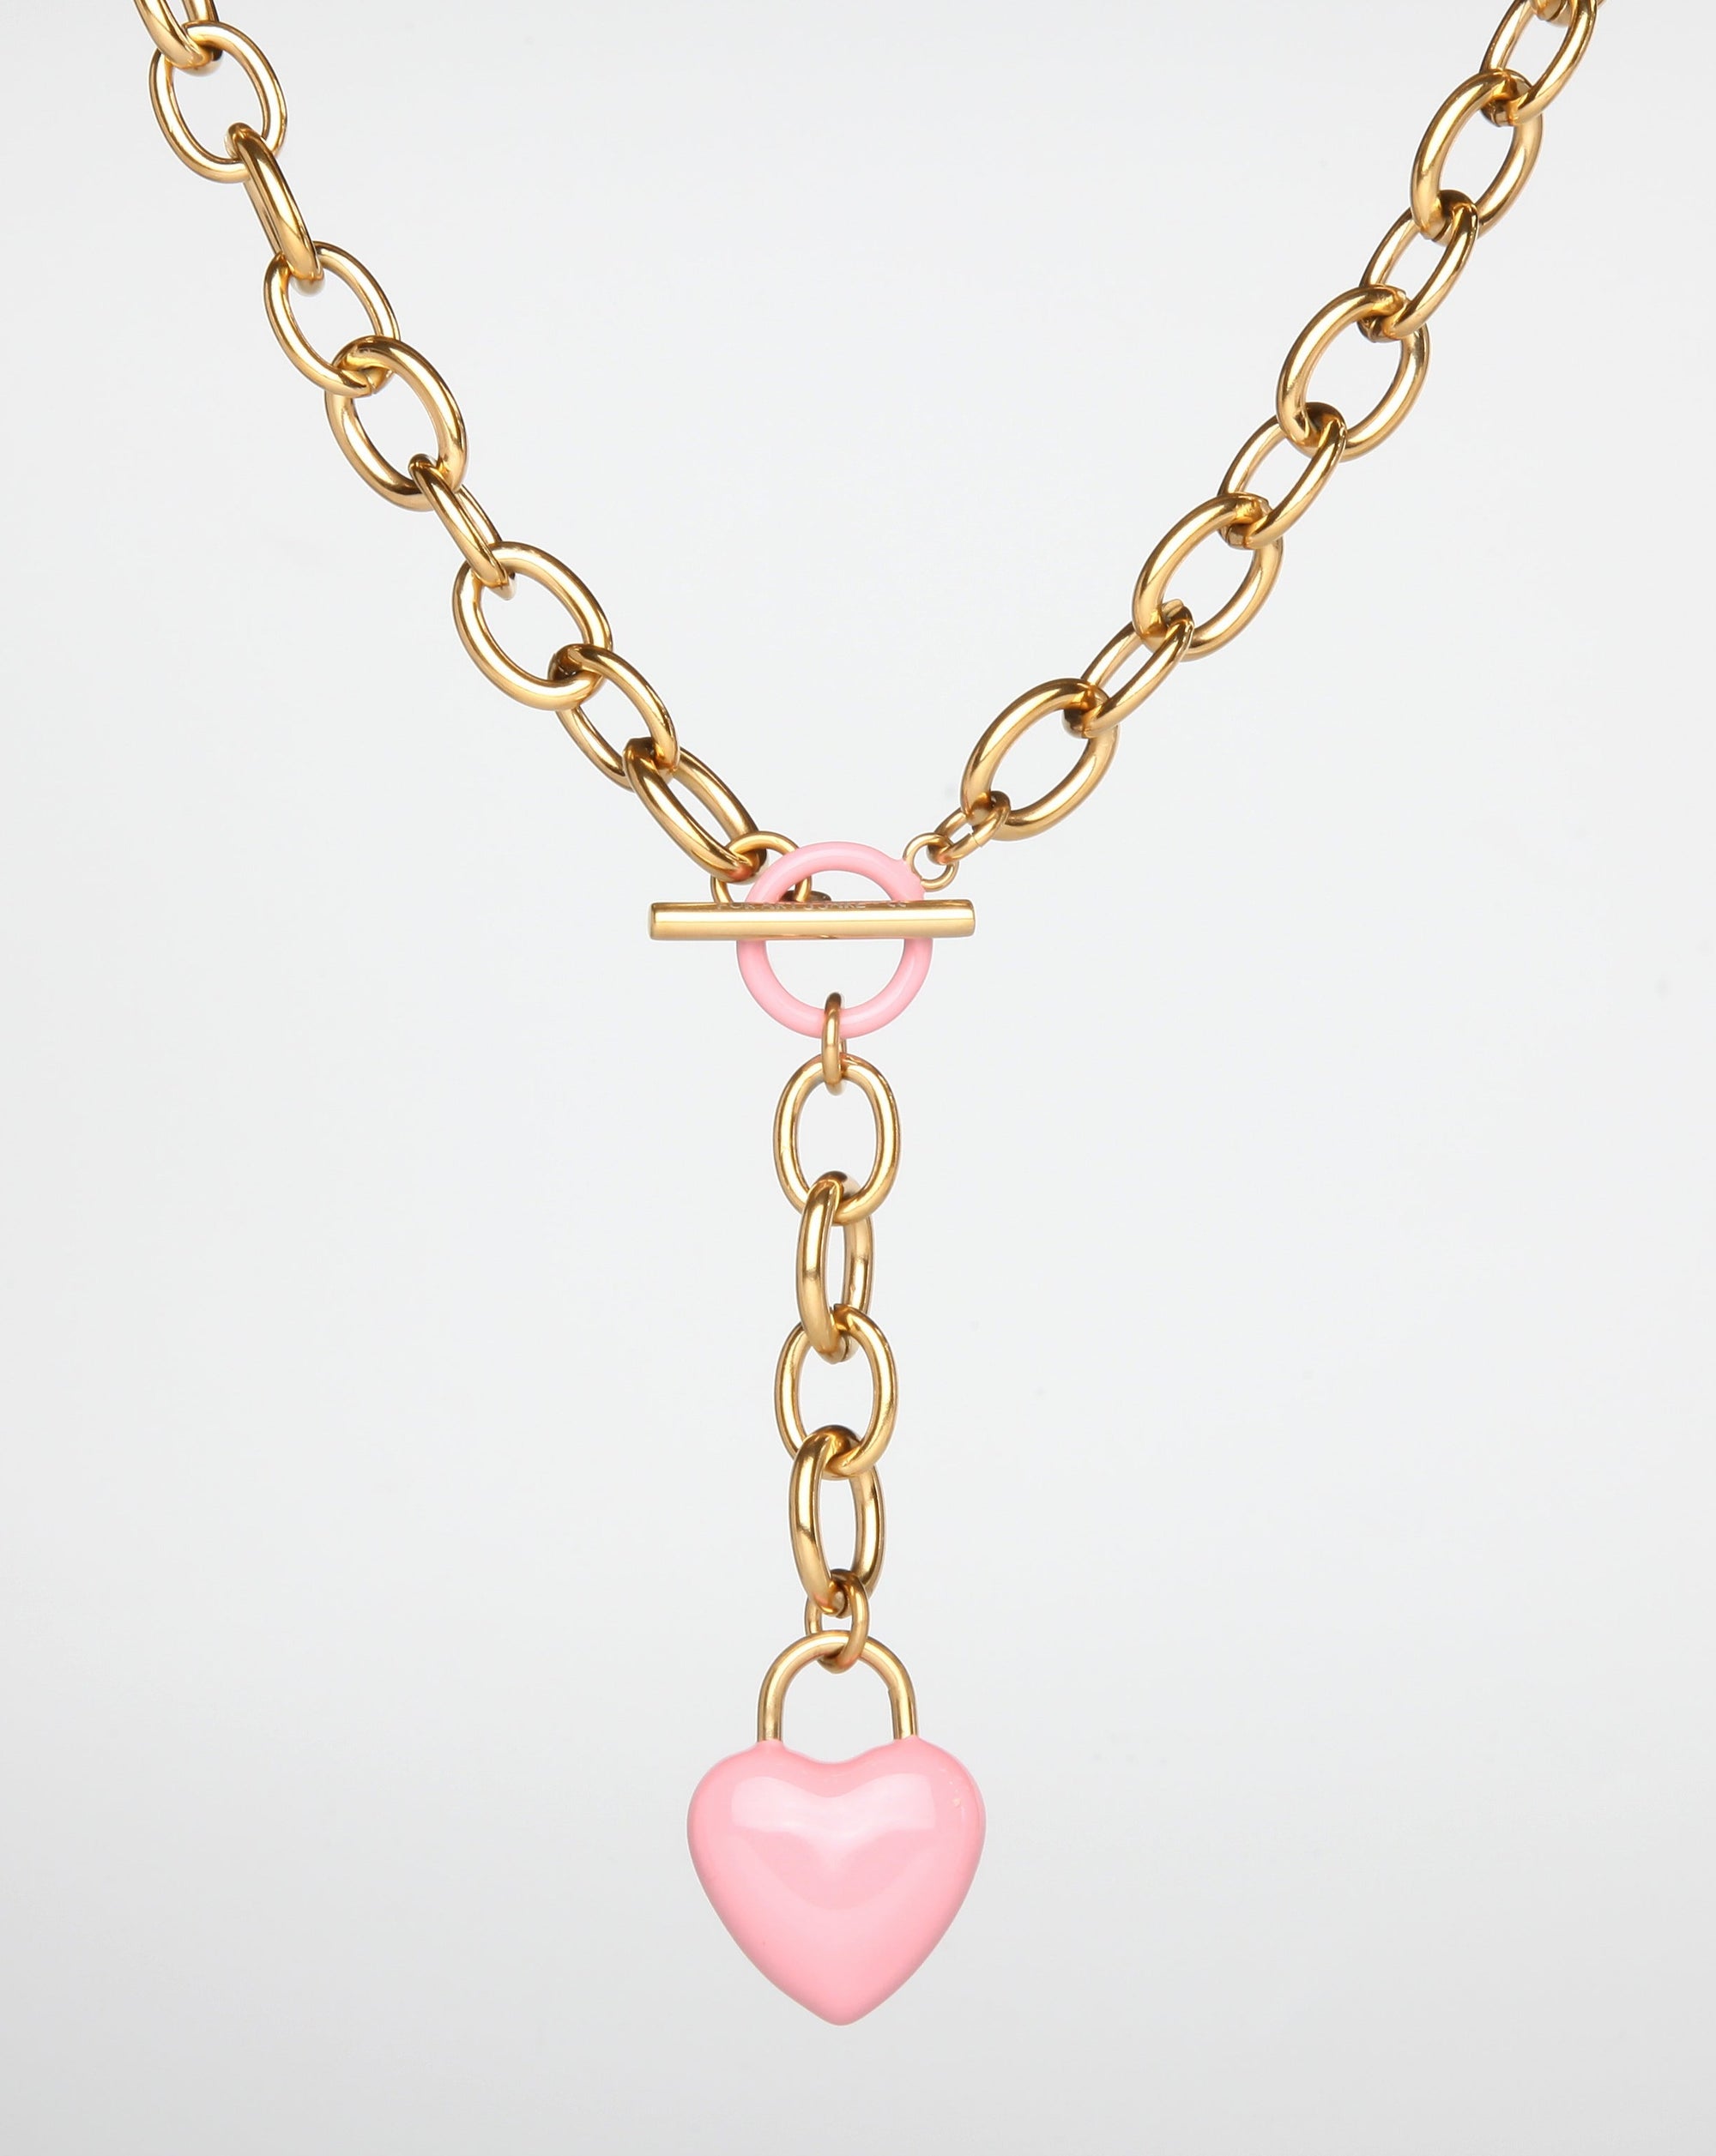 The Kiss Necklace Pink by For Art's Sake® features a pink, enamel-coated heart-shaped pendant hanging from a central T-bar clasp, which is also adorned with a pink ring.